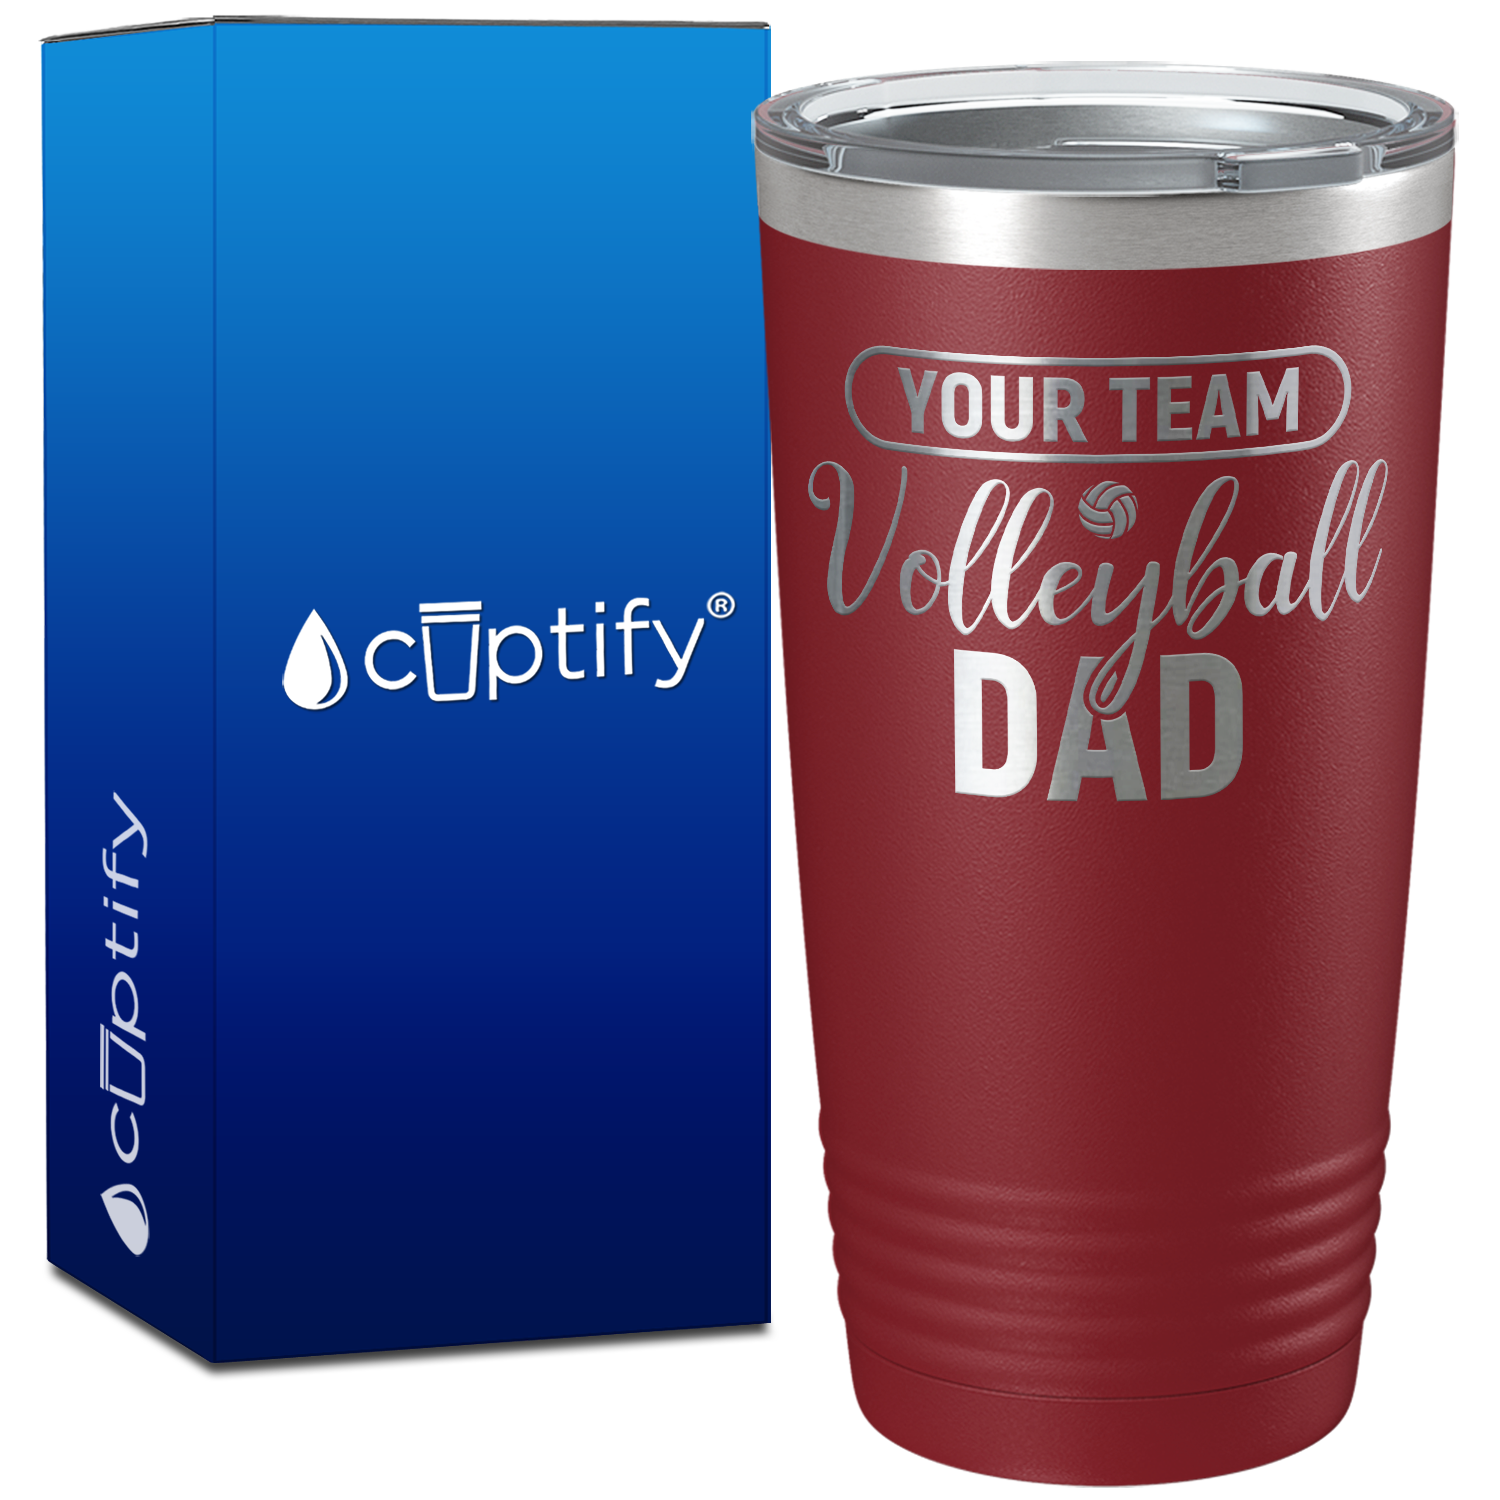 Personalized Team Name Volleyball Dad on 20oz Volleyball Tumbler